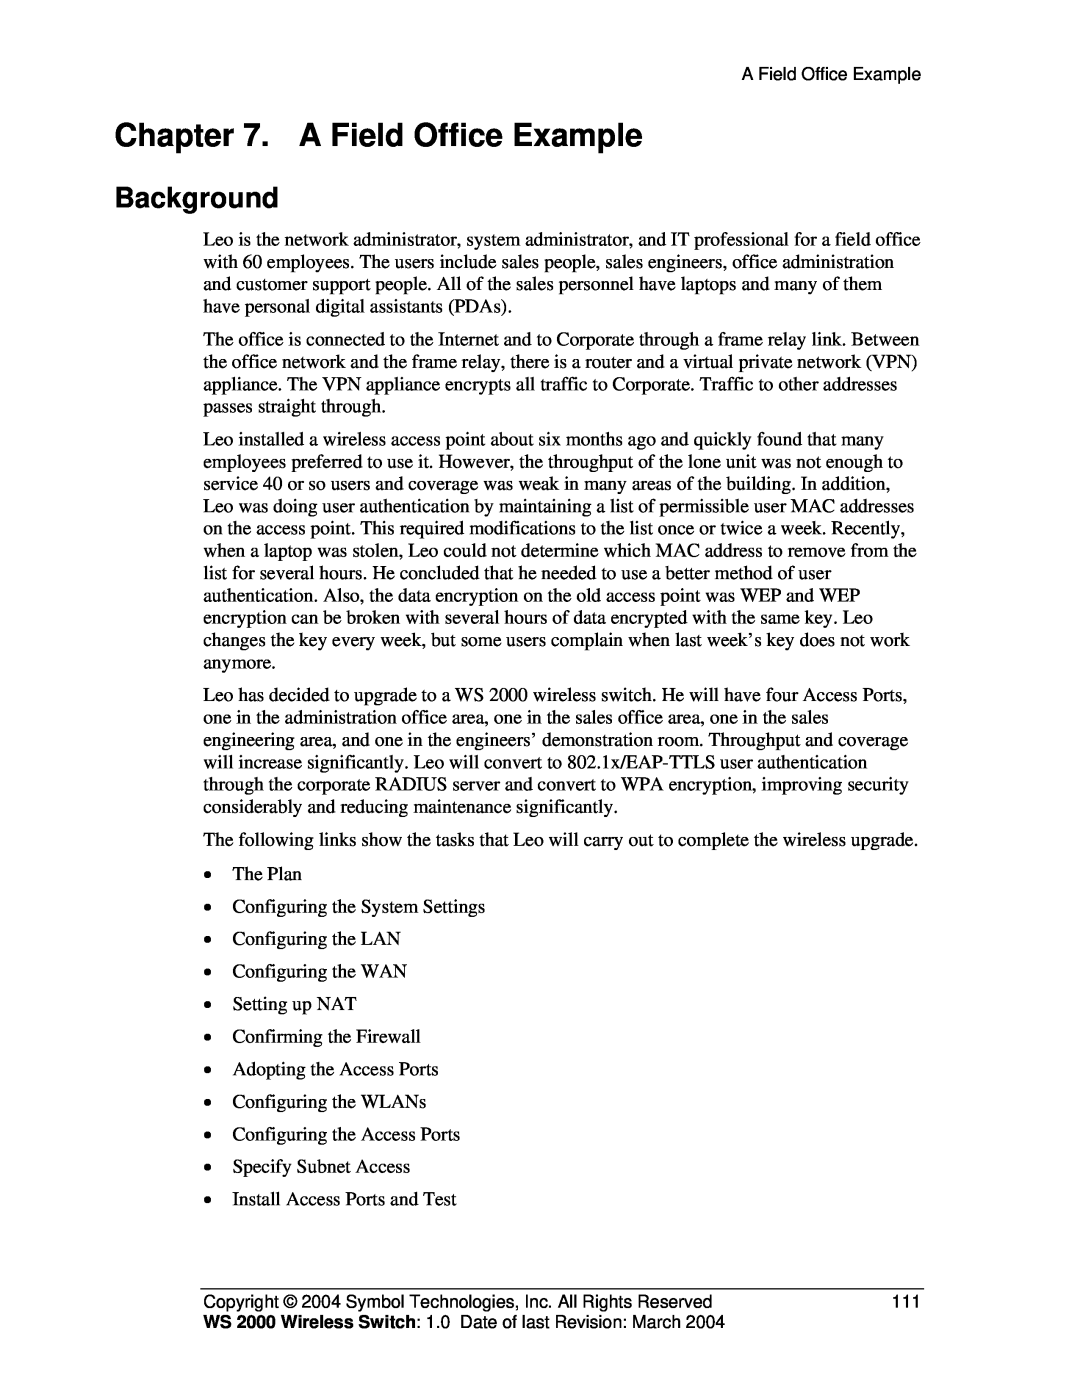 Symbol Technologies WS 2000 manual A Field Office Example, Background 